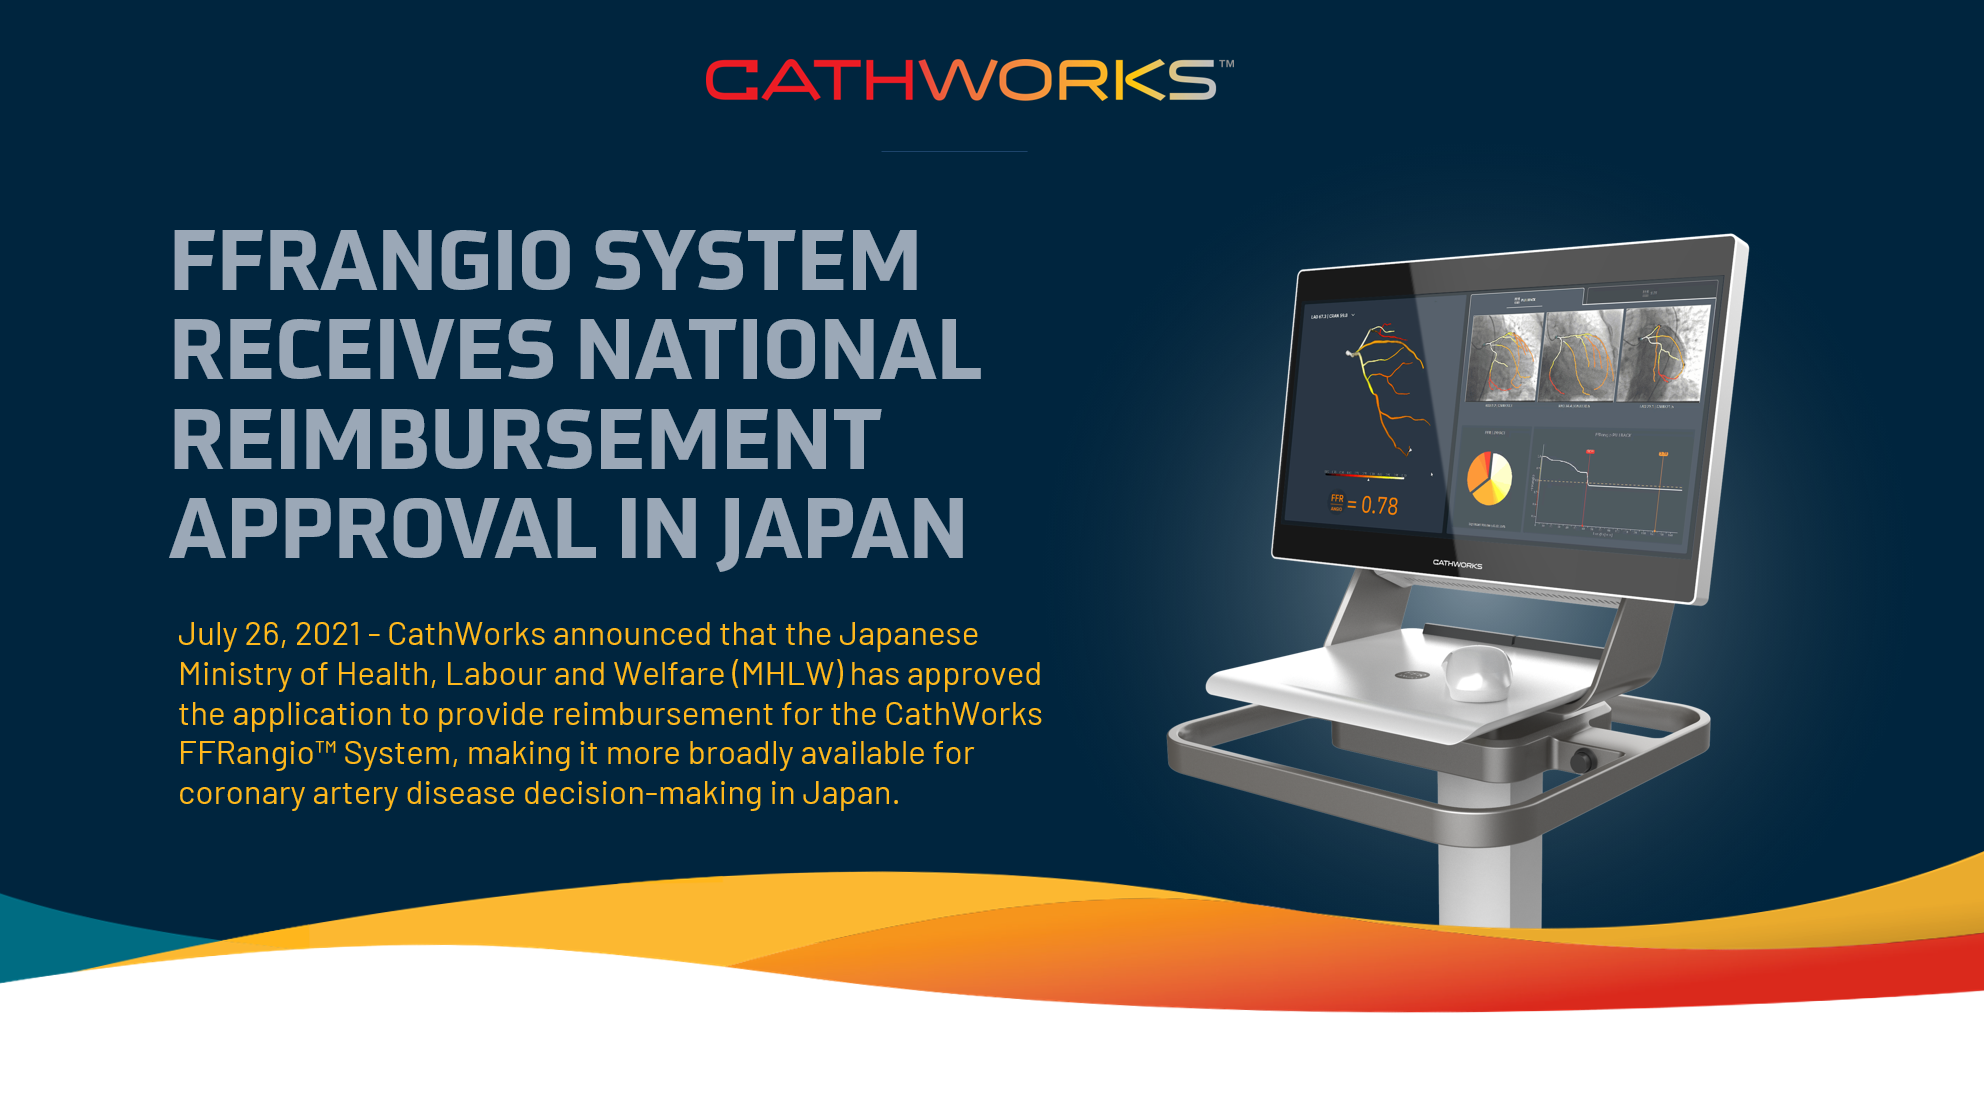 The Japanese Ministry of Health, Labour and Welfare (MHLW) has approved the CathWorks FFRangio™ System